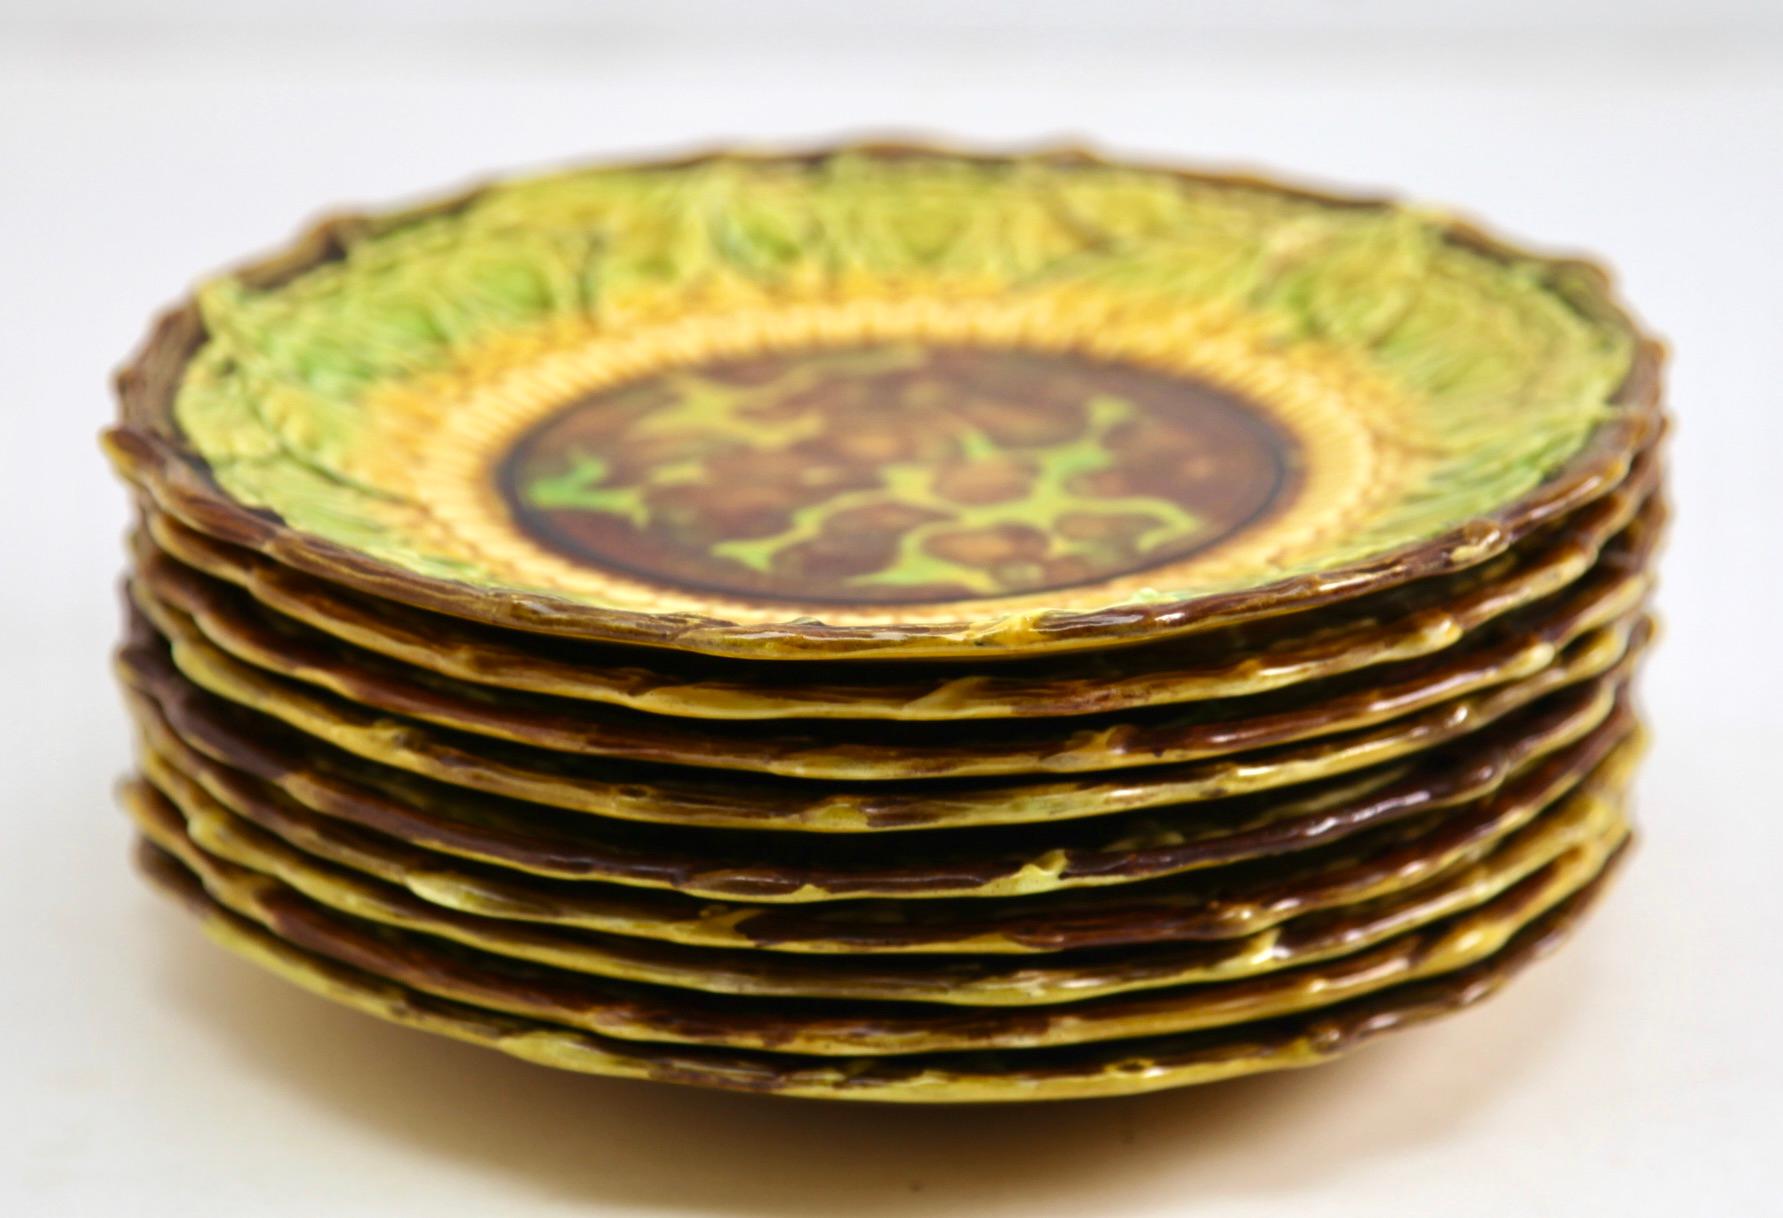 Glazed Art Nouveau Majolica glazed tableware set of 9 pieces Leaves pattern in relief. For Sale